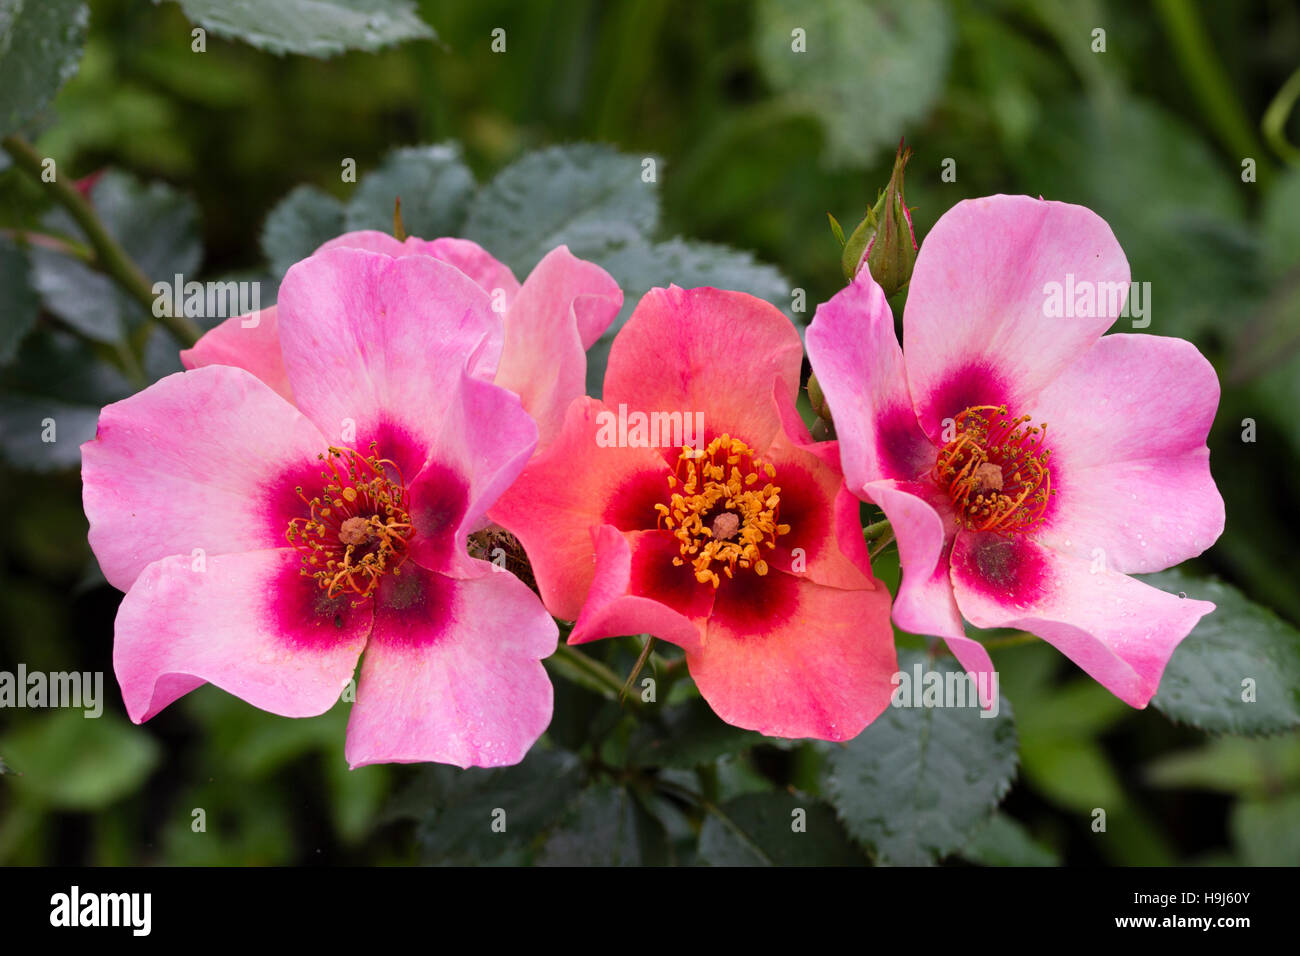 Flowers of the compact floribunda shrub rose 'For Your Eyes Only', rose of the year 2015 Stock Photo